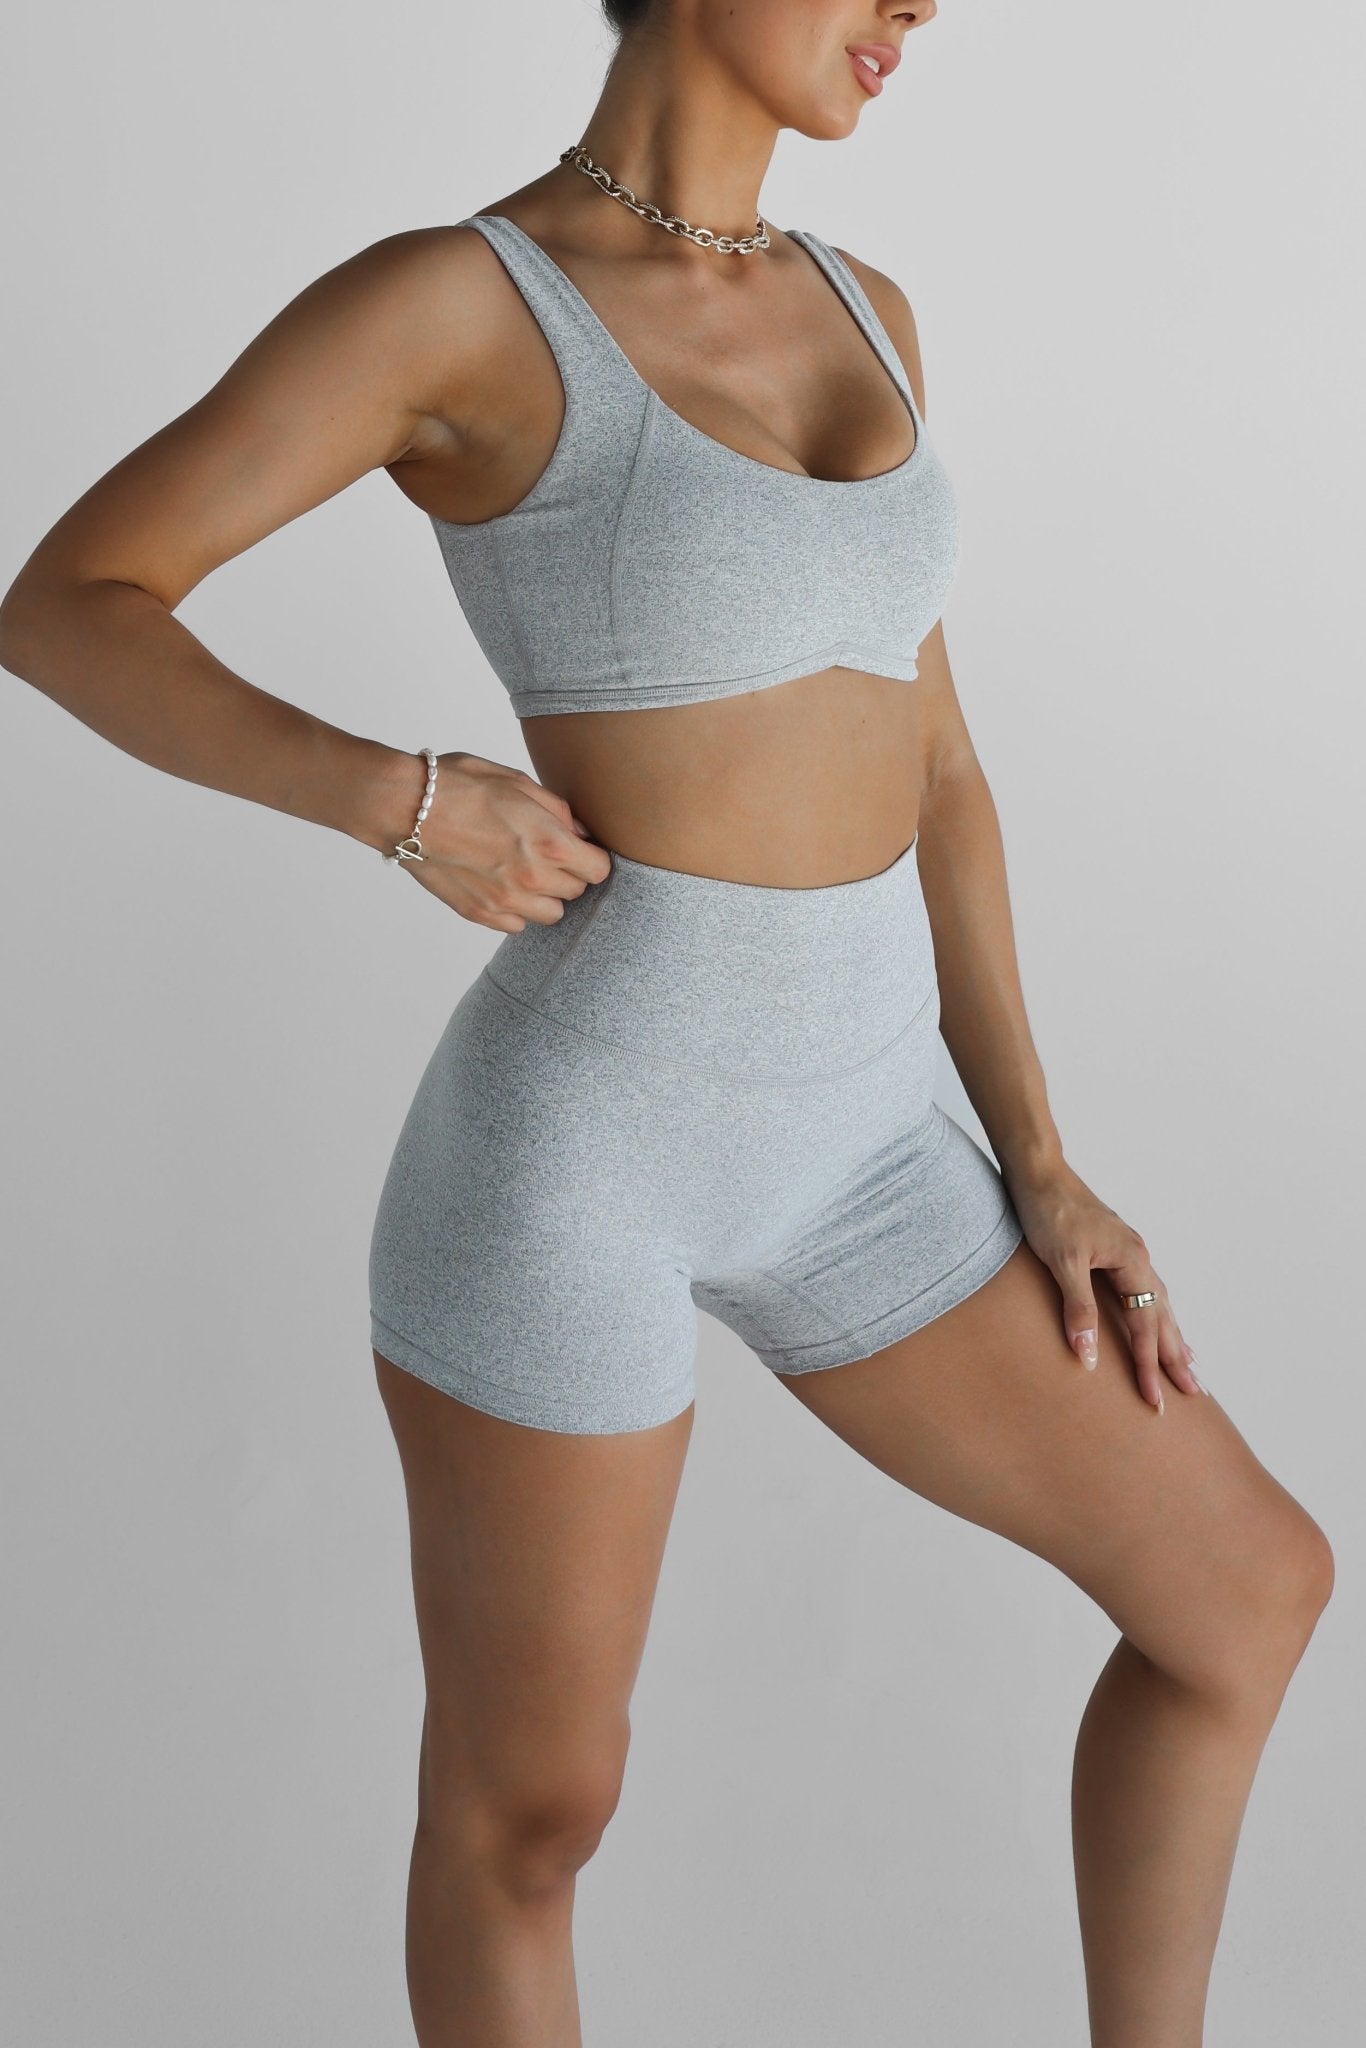 Luxe Signature Crop - Marl Grey (Pre-Order Shipping 01st May) - LEELO ACTIVE